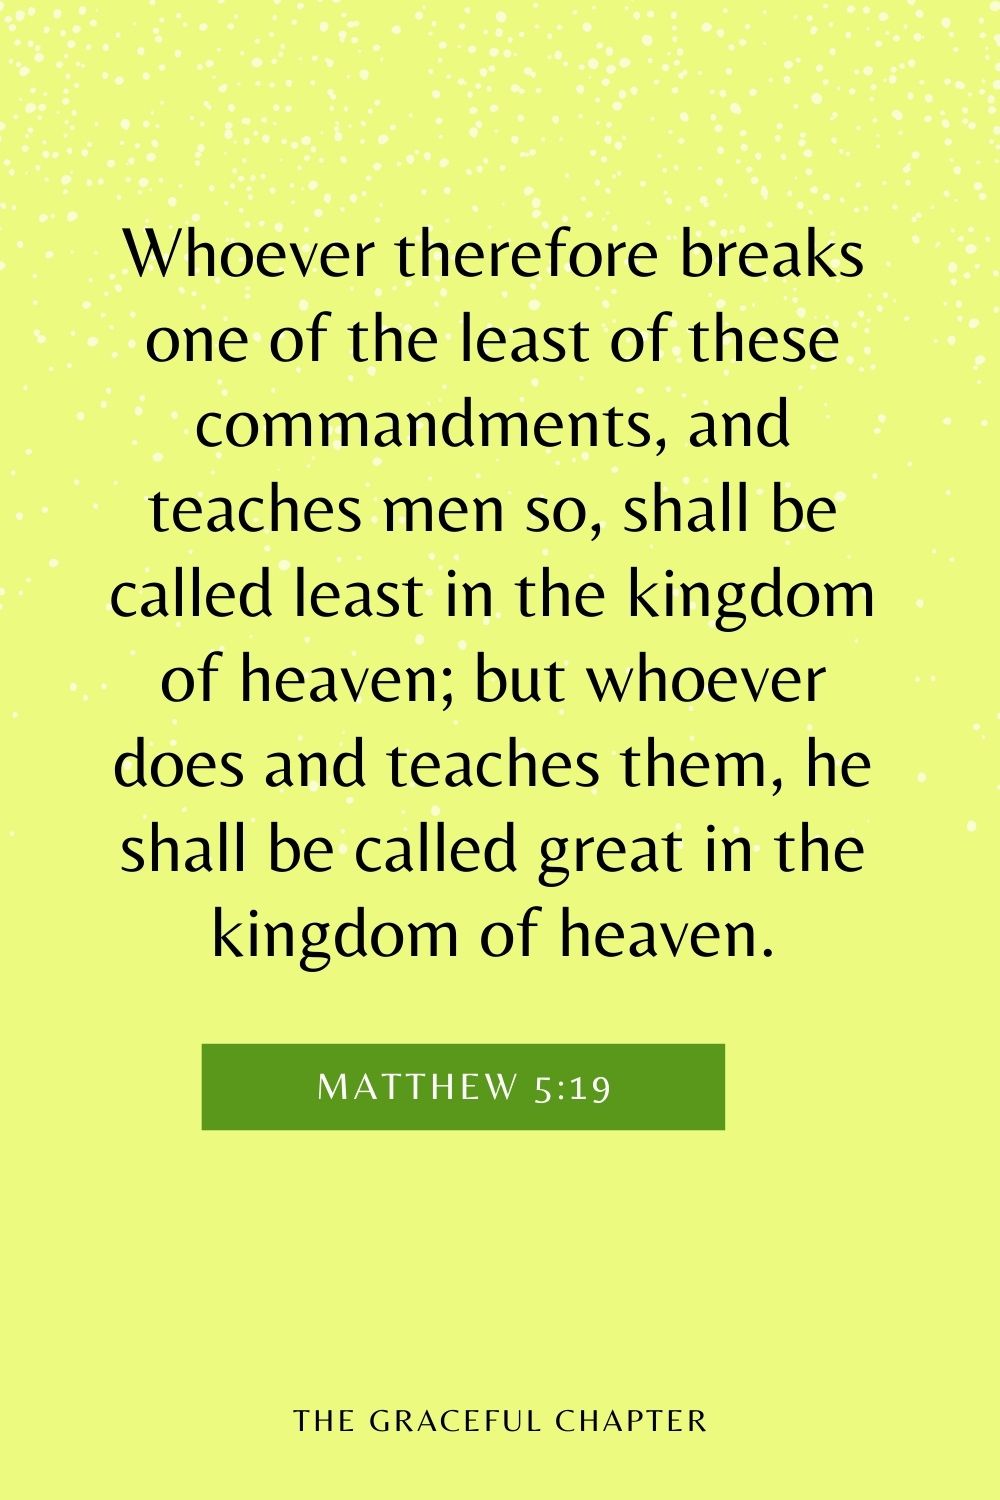 Whoever therefore breaks one of the least of these commandments, and teaches men so, shall be called least in the kingdom of heaven; but whoever does and teaches them, he shall be called great in the kingdom of heaven. Matthew 5:19